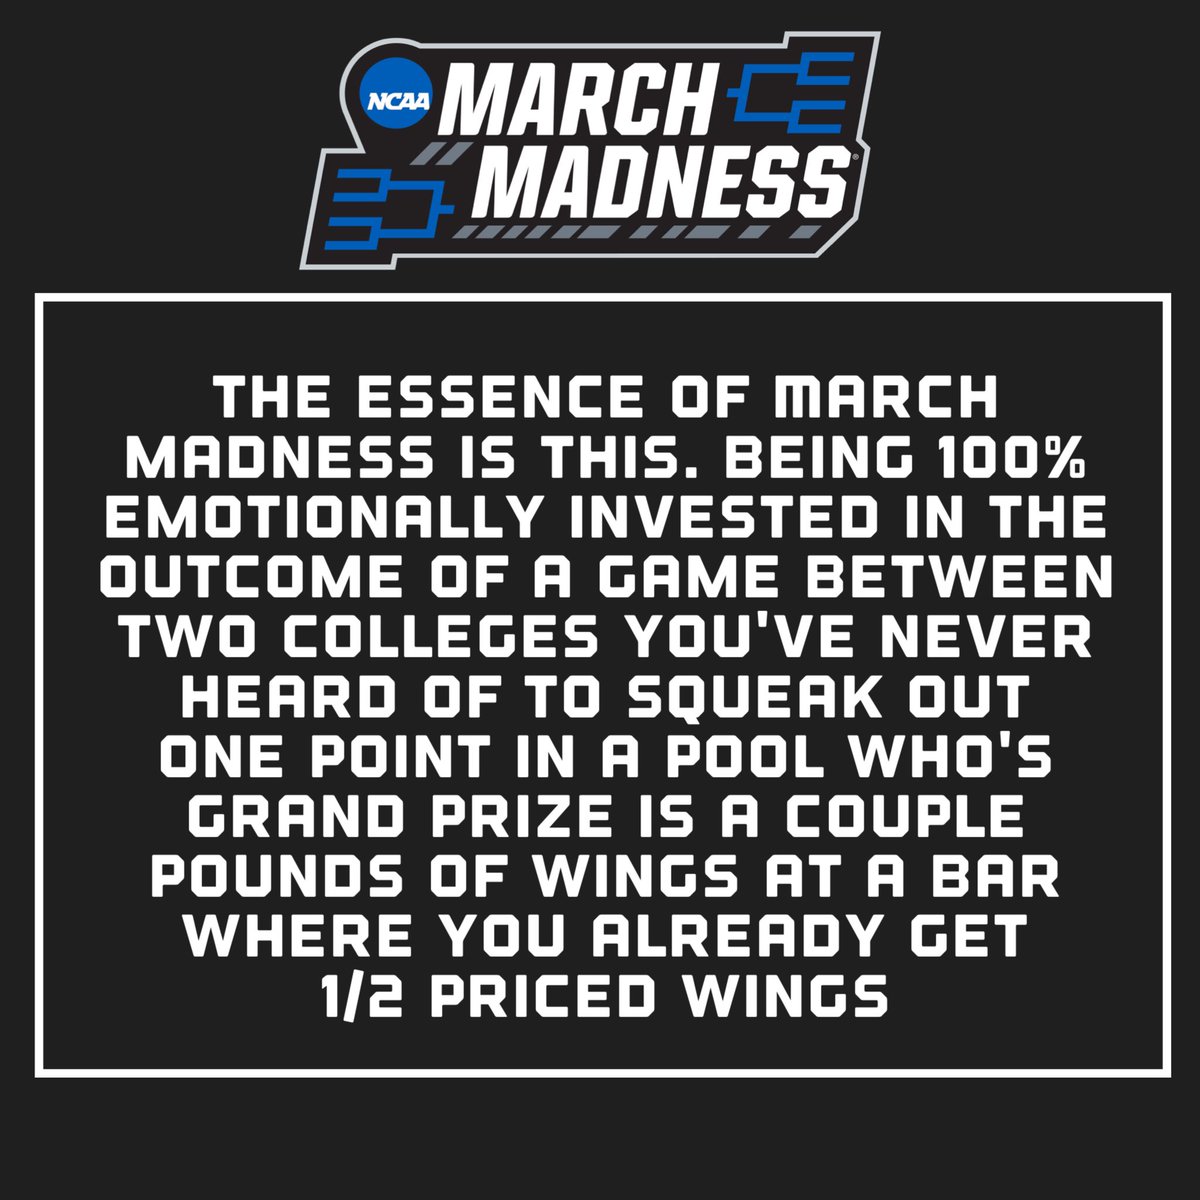 #MarchMadness #NCAA #FinalFour #Sweet16